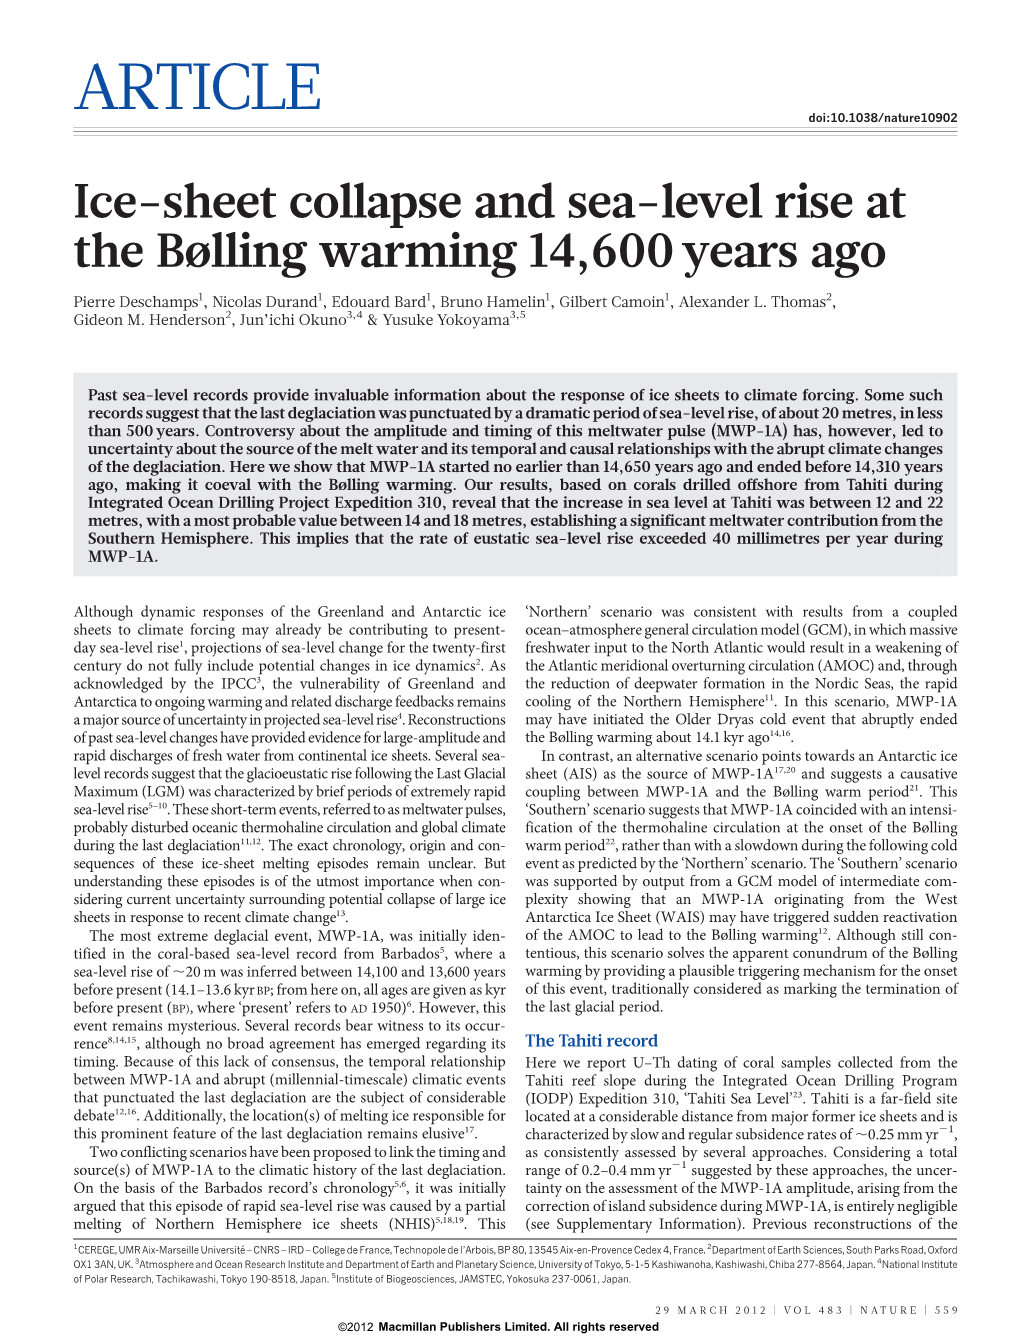 Ice-Sheet Collapse and Sea-Level Rise at the Bølling Warming 14,600 Years Ago